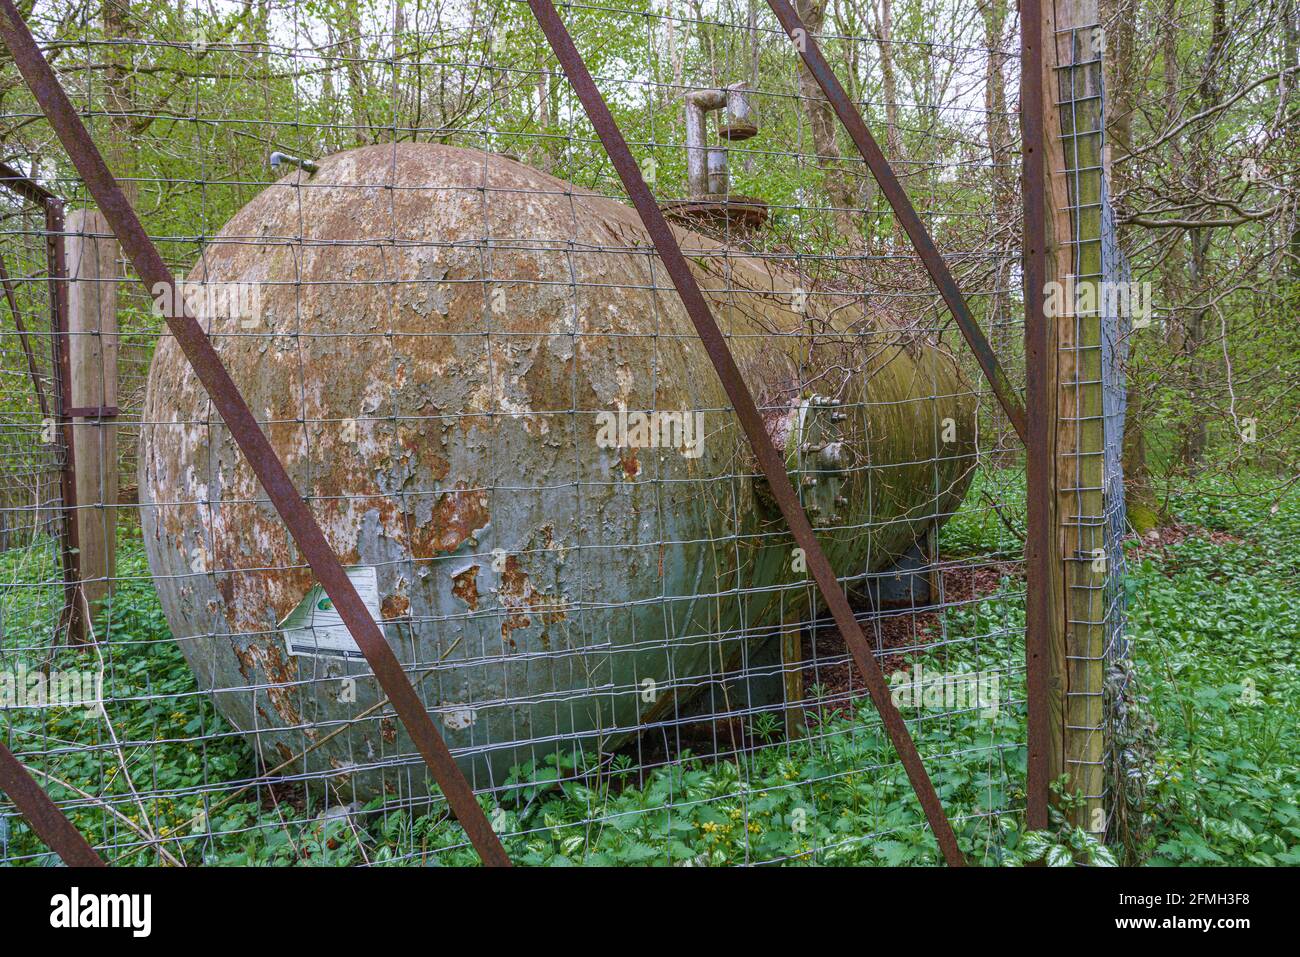 a large metal storage tank rusting away in a dense woodland location Stock Photo